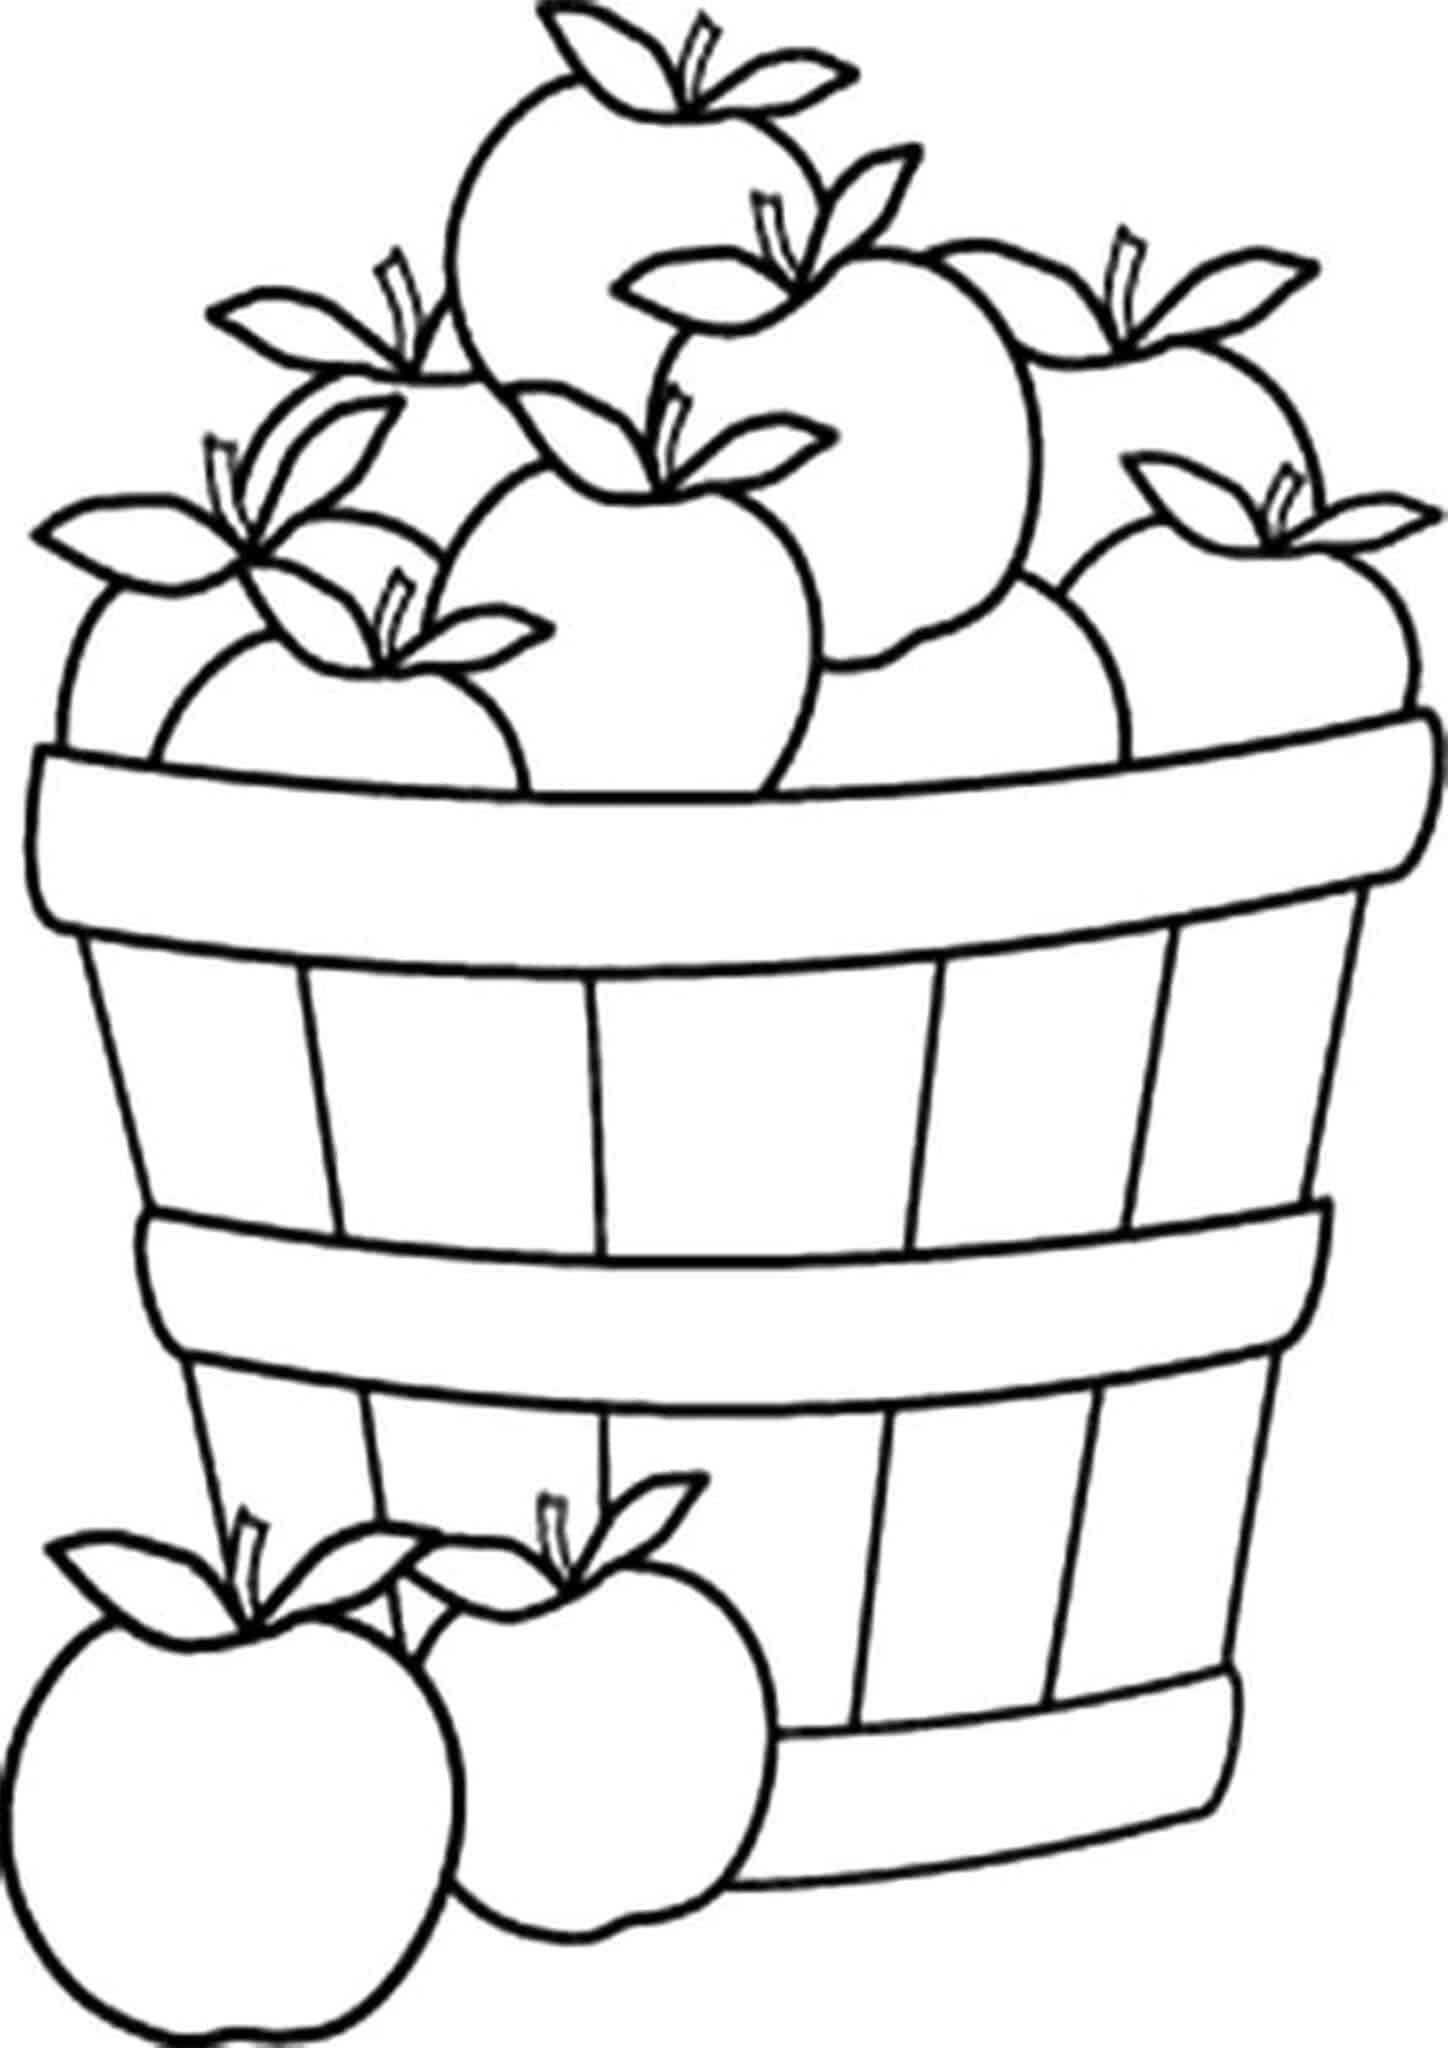 printable apple pictures to color